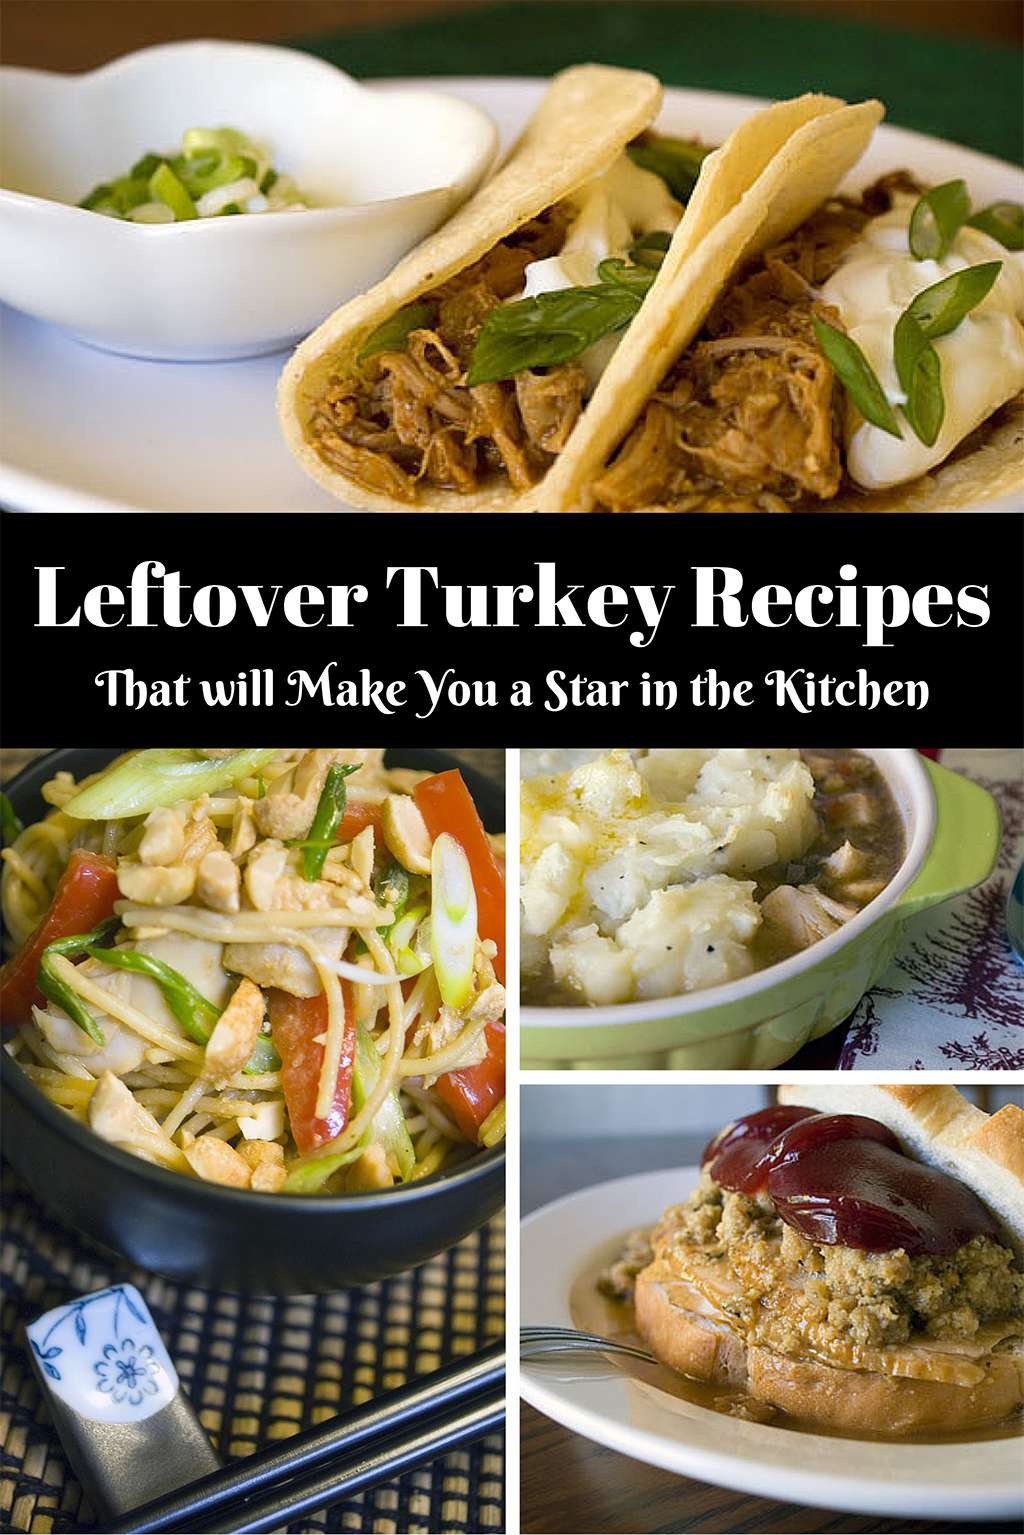 The Kitchen Thanksgiving Recipes
 Leftover Turkey Recipes That Will Make You a Star in the